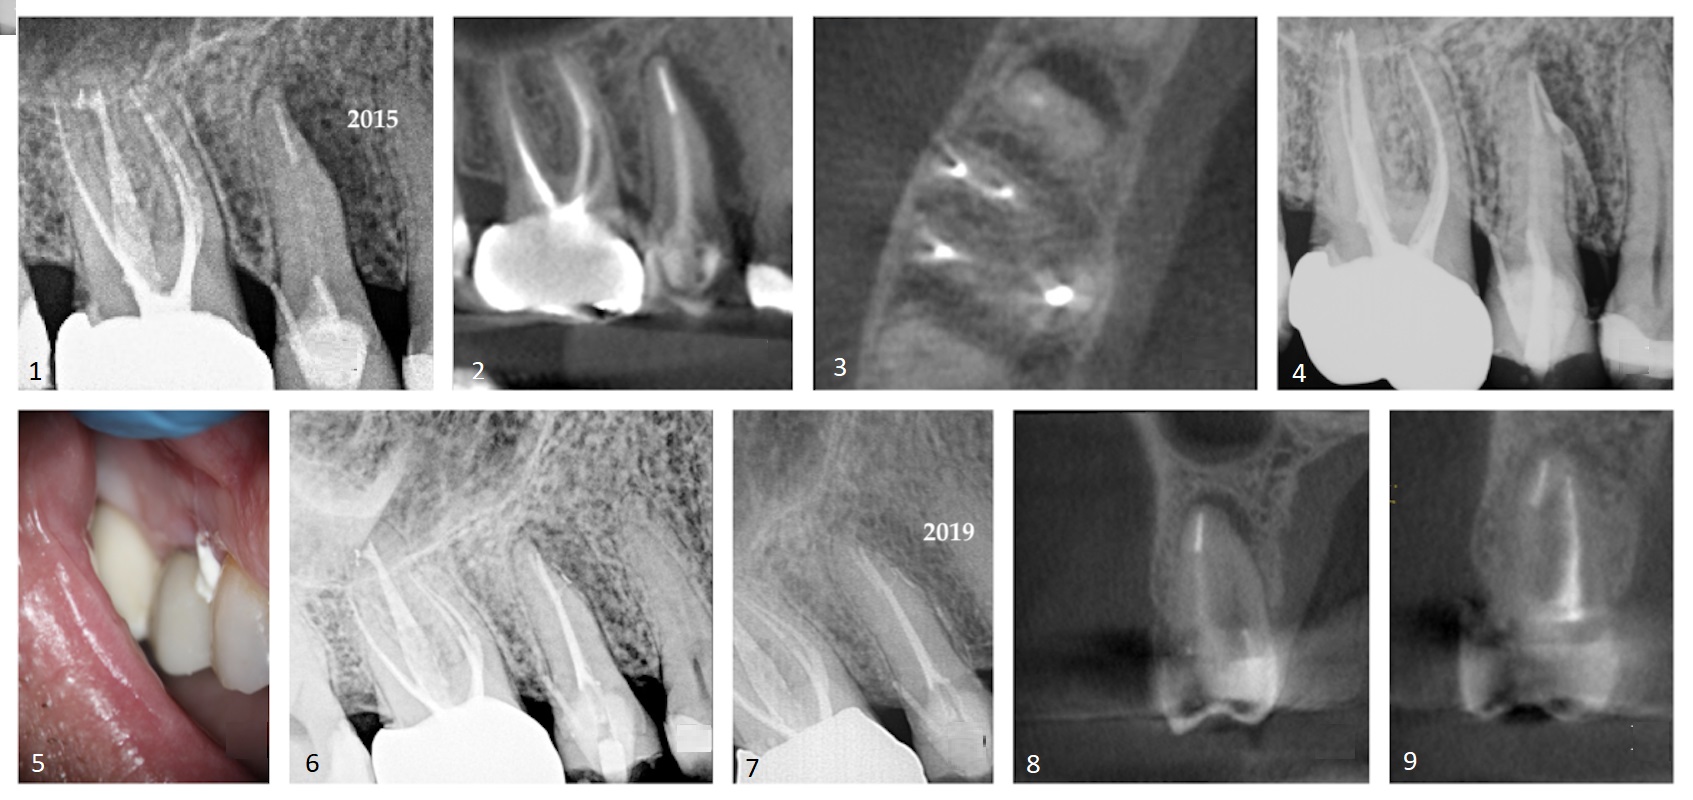 Case 1—Fig. 1: An area of periradicular rarefaction was evident along the mesio-proximal aspect of tooth #15. Previous root canal therapy and a pin-retained post and core supporting a zirconia crown were noted. Fig. 2: The sagittal slice of the CBCT volume showed the lateral lesion extending to the alveolar crest. Fig. 3: The axial slice of the CBCT volume showed the extent of the rarefaction adjacent to the mesial aspect of the root and the presence of an untreated palatal canal. Fig. 4: Selective treatment of the palatal canal was performed. Calcium hydroxide was inserted in the canal space. Fig. 5: The extrusion of the interim calcium hydroxide medicament through the sulcular area of tooth #15 was evident. Fig. 6: A lateral branch of the root canal space containing the obturation material exited into the interface of the middle and apical thirds of the root. Fig. 7: A periapical radiograph taken four years after treatment showed osseous regeneration and the reformation of the periodontal ligament. Fig. 8: The coronal slice of the CBCT volume showed the pre-op periradicular radiolucency. Fig. 9: The coronal slice of the CBCT volume taken four years after treatment showed the resolution of the periradicular radiolucency.